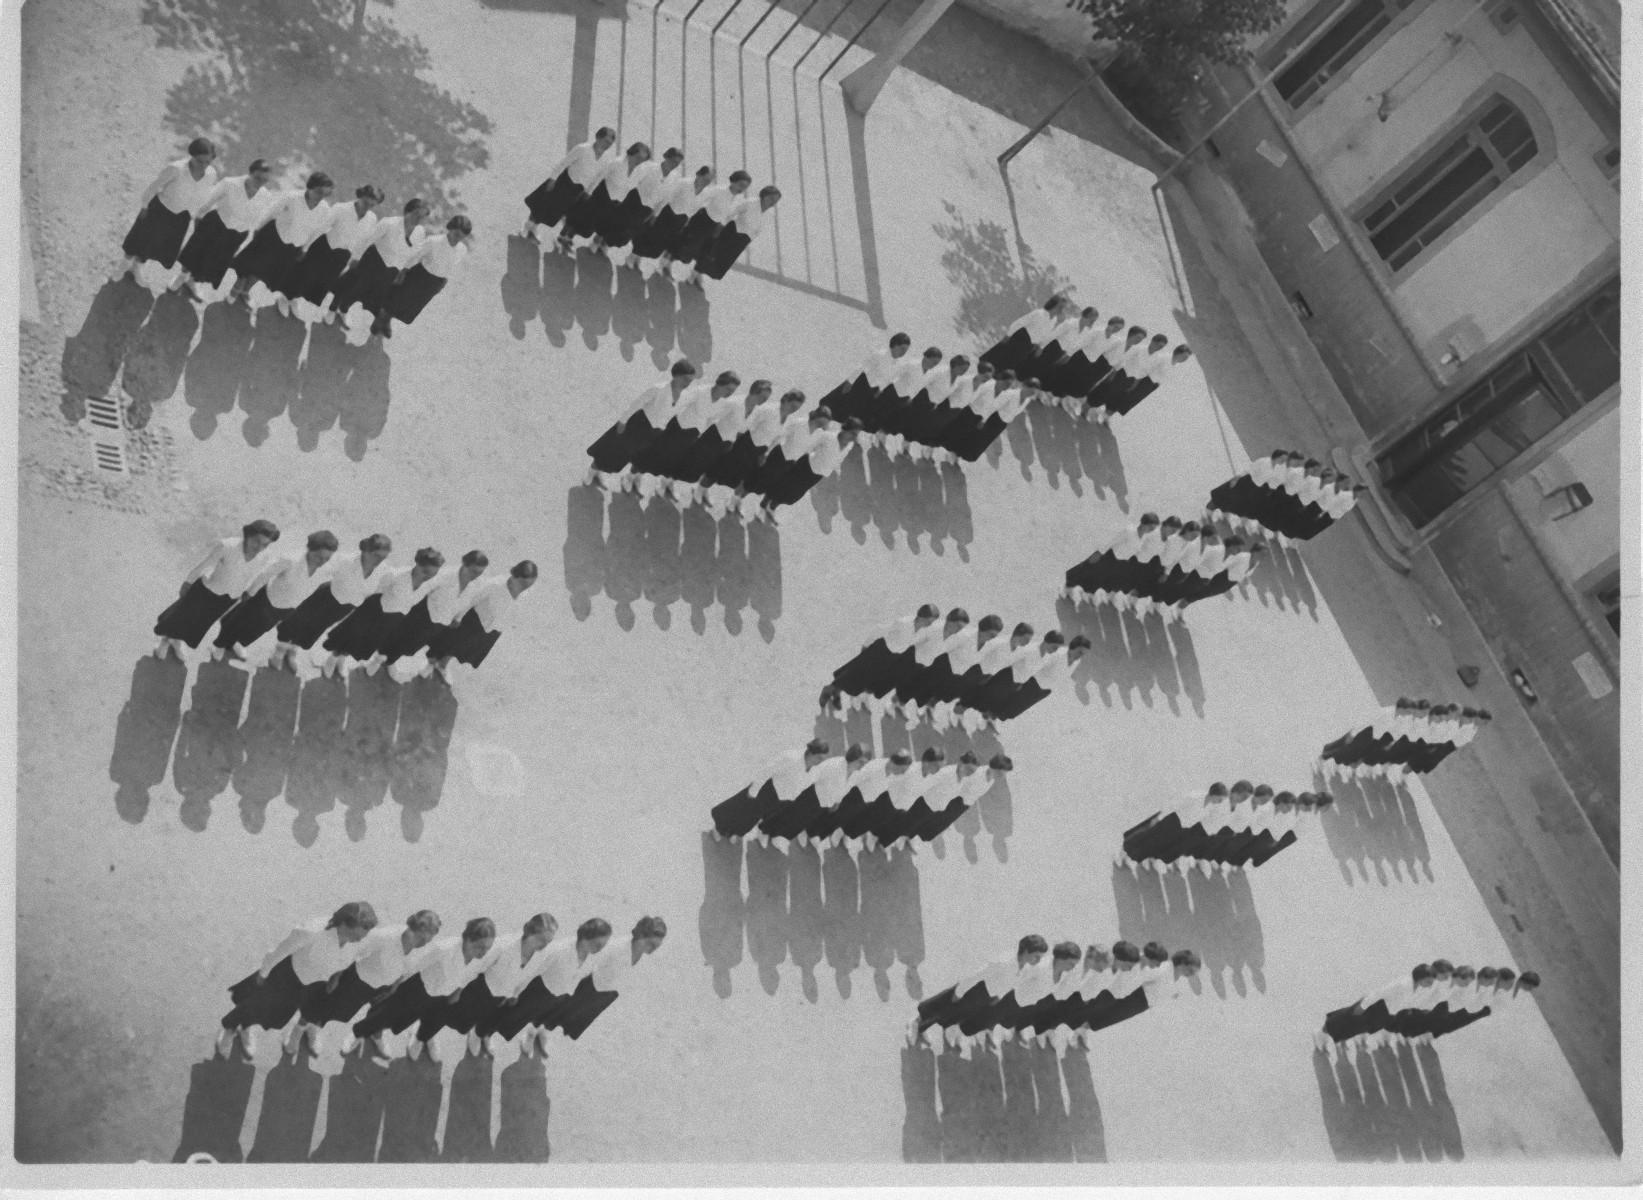 Unknown Figurative Photograph - Physical Education in a School During Fascism - Vintage b/w Photo - 1930s